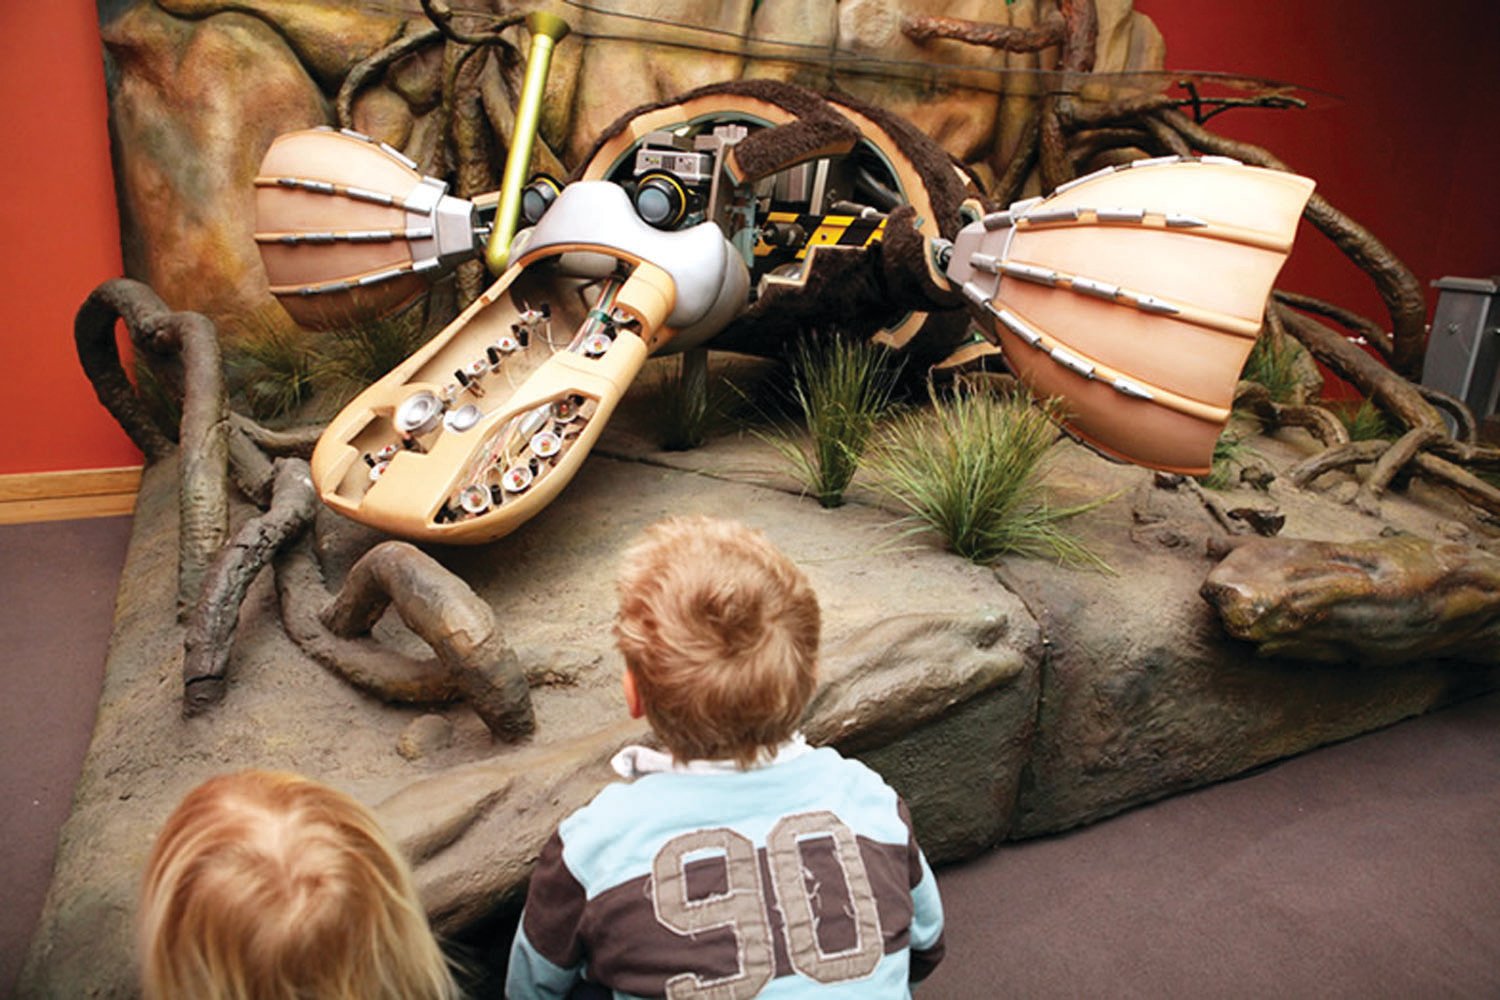 At the Robot Zoo, a touring exhibit, children of all ages can explore the biomechanics of complex animal robots to discover how real animals work.